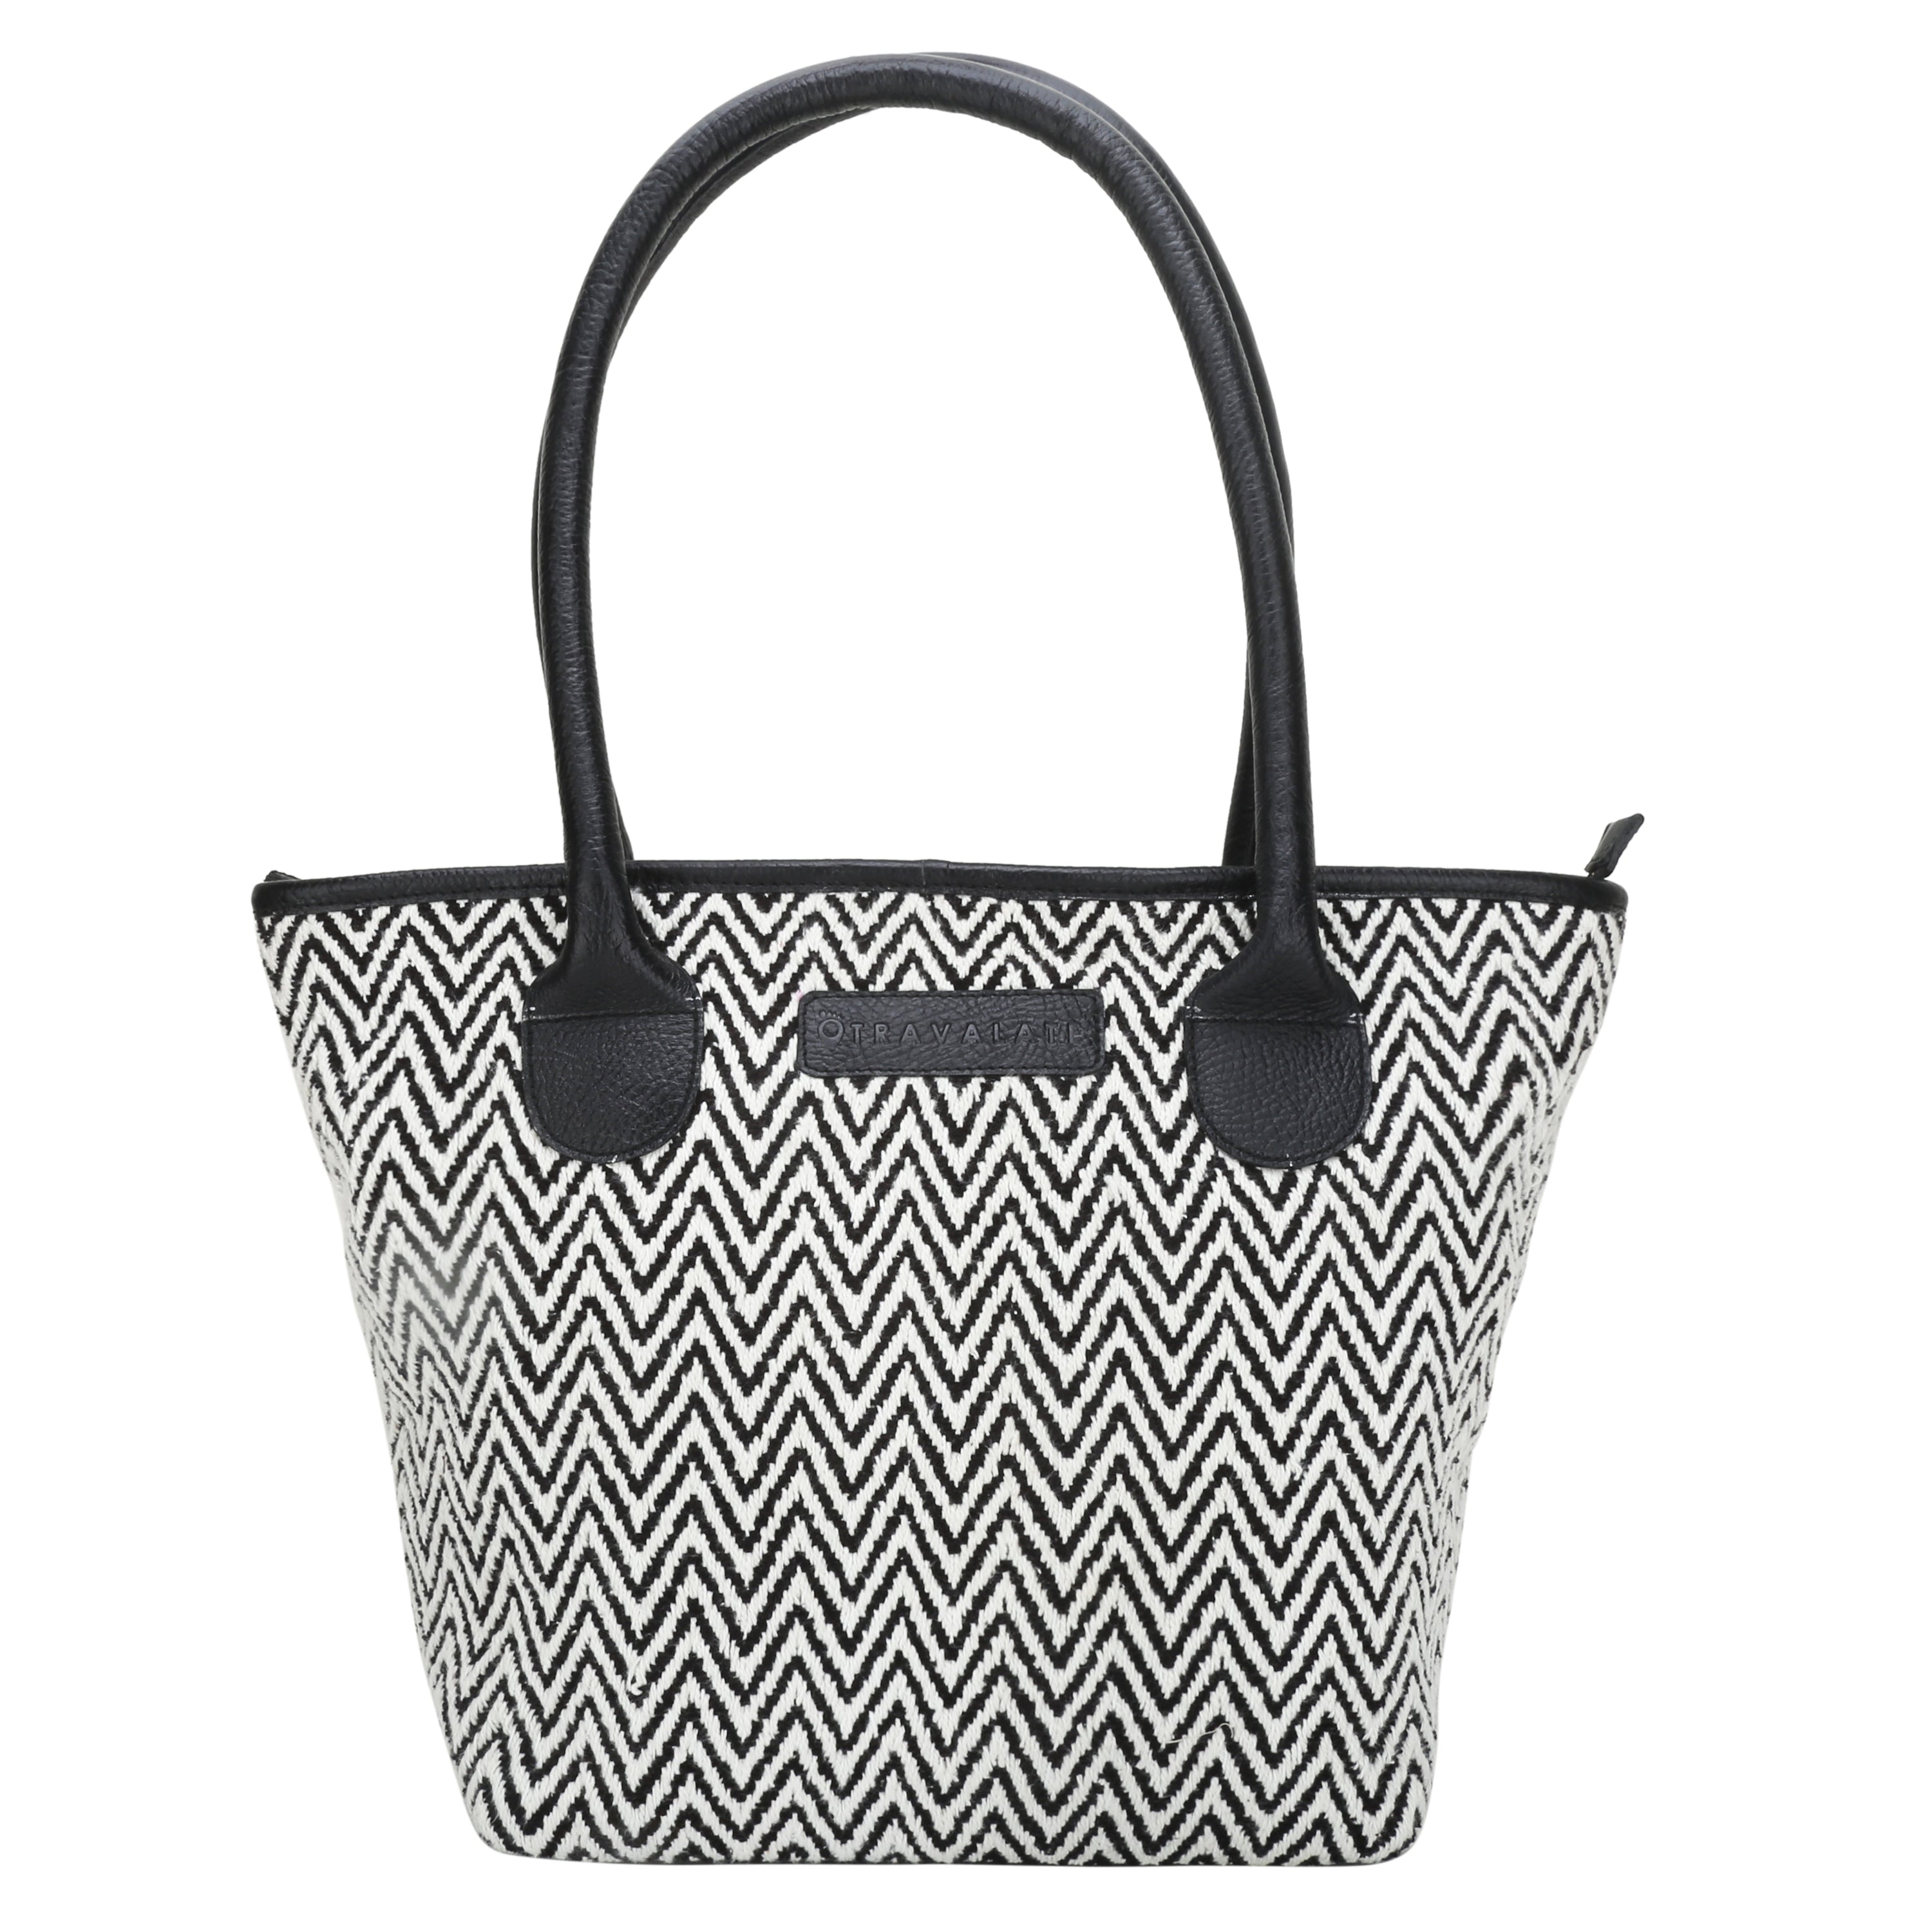 Woven Patterned Tote Bag | Black and White